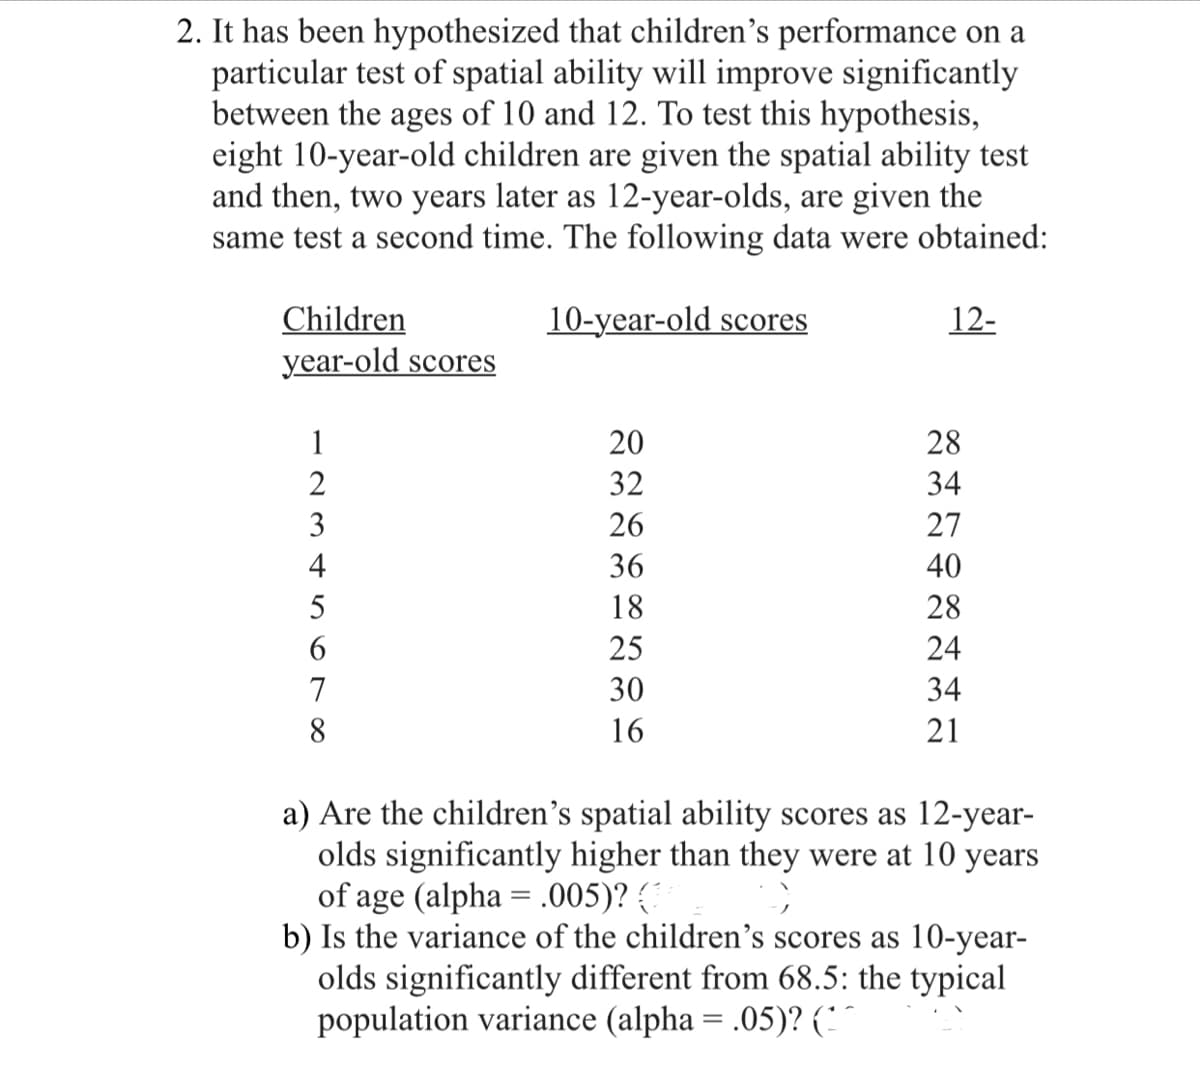 2. It has been hypothesized that children's performance on a
particular test of spatial ability will improve significantly
between the ages of 10 and 12. To test this hypothesis,
eight 10-year-old children are given the spatial ability test
and then, two years later as 12-year-olds, are given the
same test a second time. The following data were obtained:
10-year-old scores
Children
year-old scores
1234567 ∞
DESSENCE
8
20
32
26
36
18
25
30
16
12-
XHAXHIN
28
34
27
40
28
24
34
21
a) Are the children's spatial ability scores as 12-year-
olds significantly higher than they were at 10 years
of age (alpha = .005)? (3 9
b) Is the variance of the children's scores as 10-year-
olds significantly different from 68.5: the typical
population variance (alpha = .05)? (^^